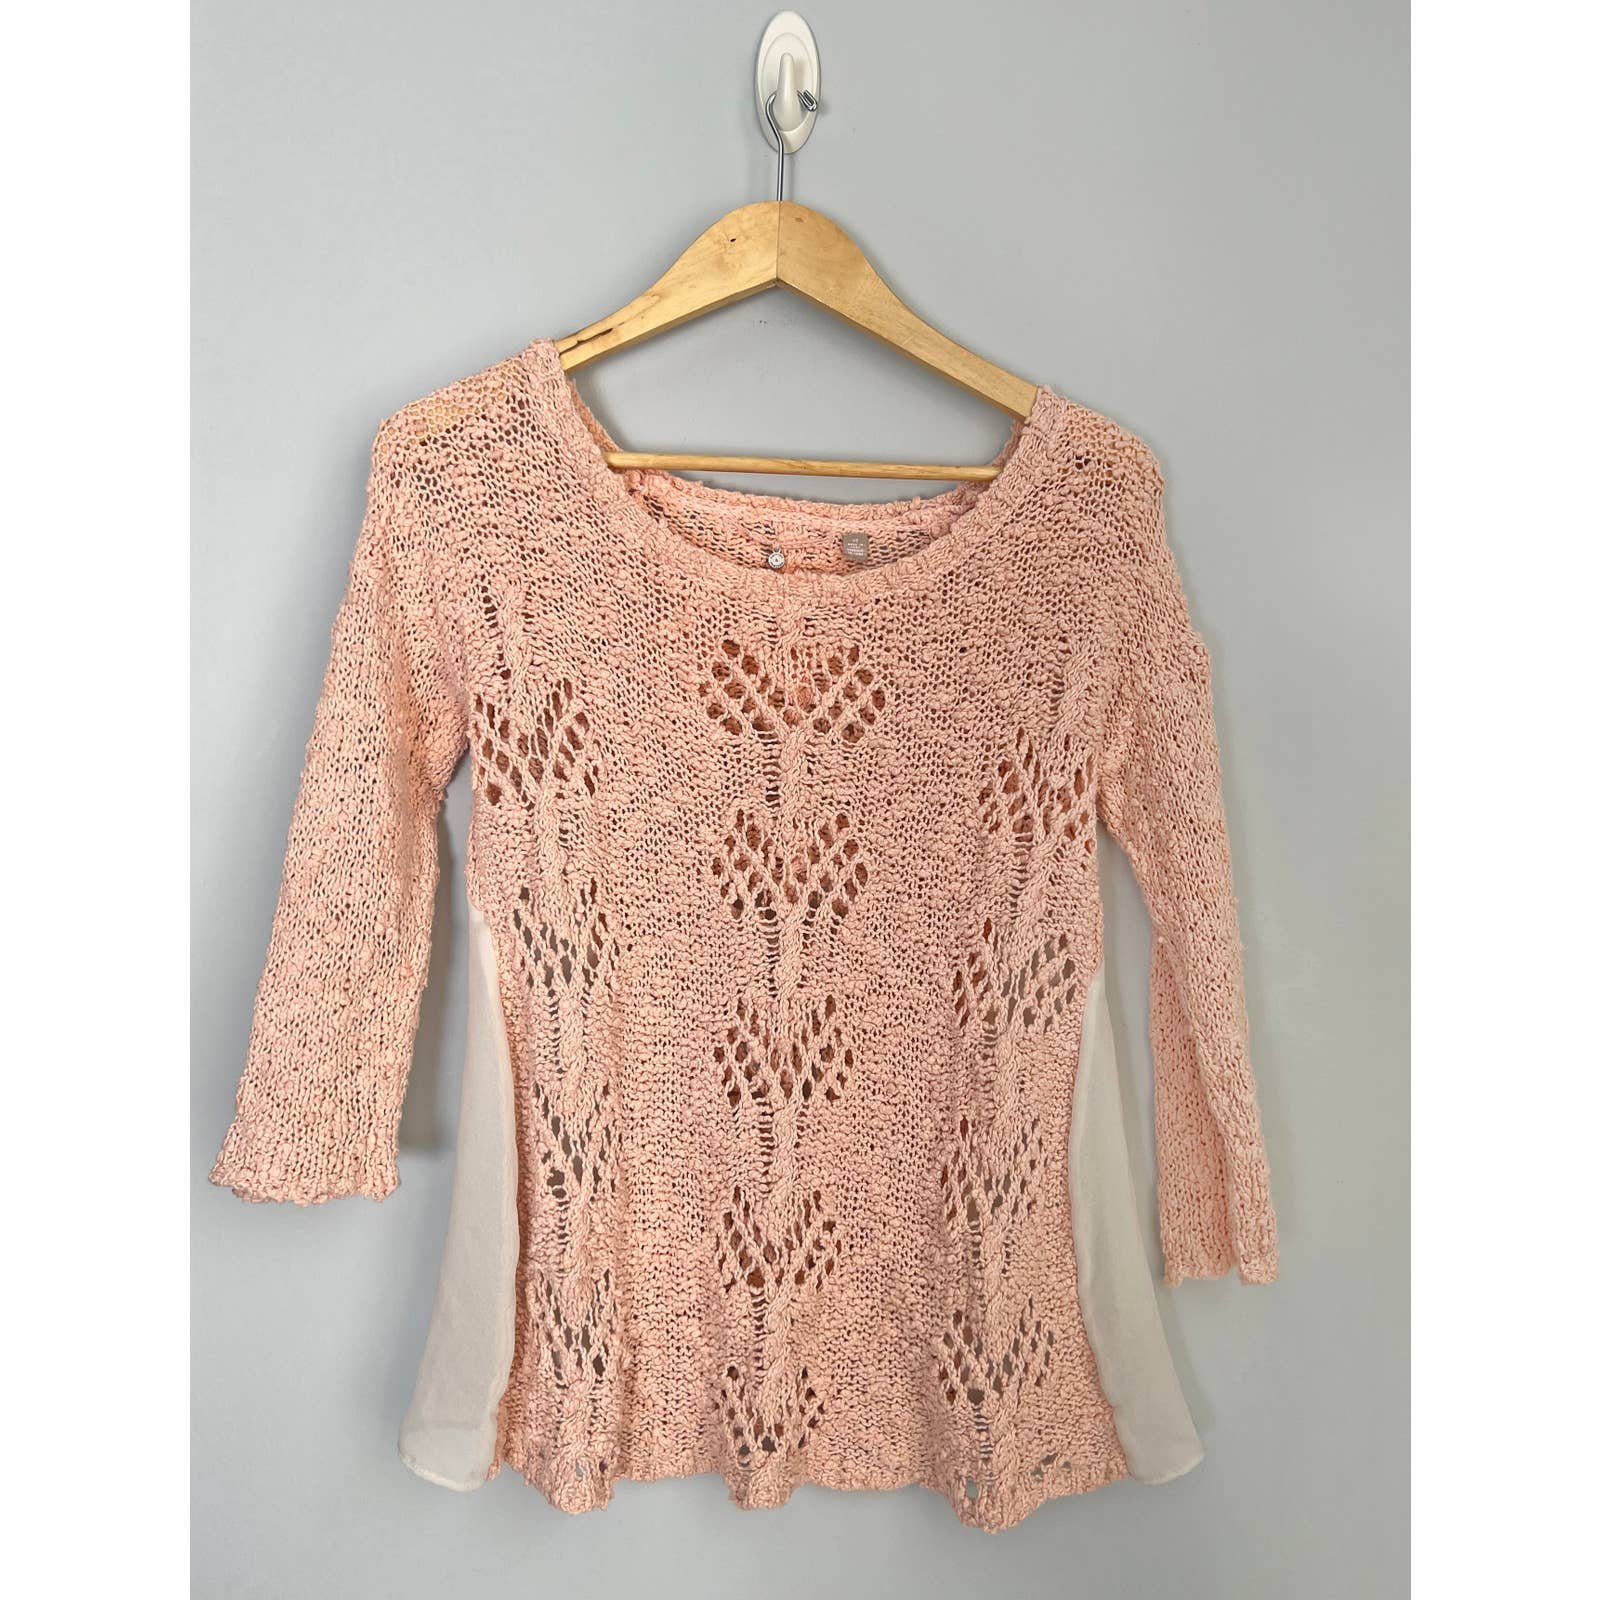 Exclusive ANTHROPOLOGIE KNITTED AND KNOTTED sz XS pink knit sweater w/ cream silk panels OW9GaCUFr Low Price